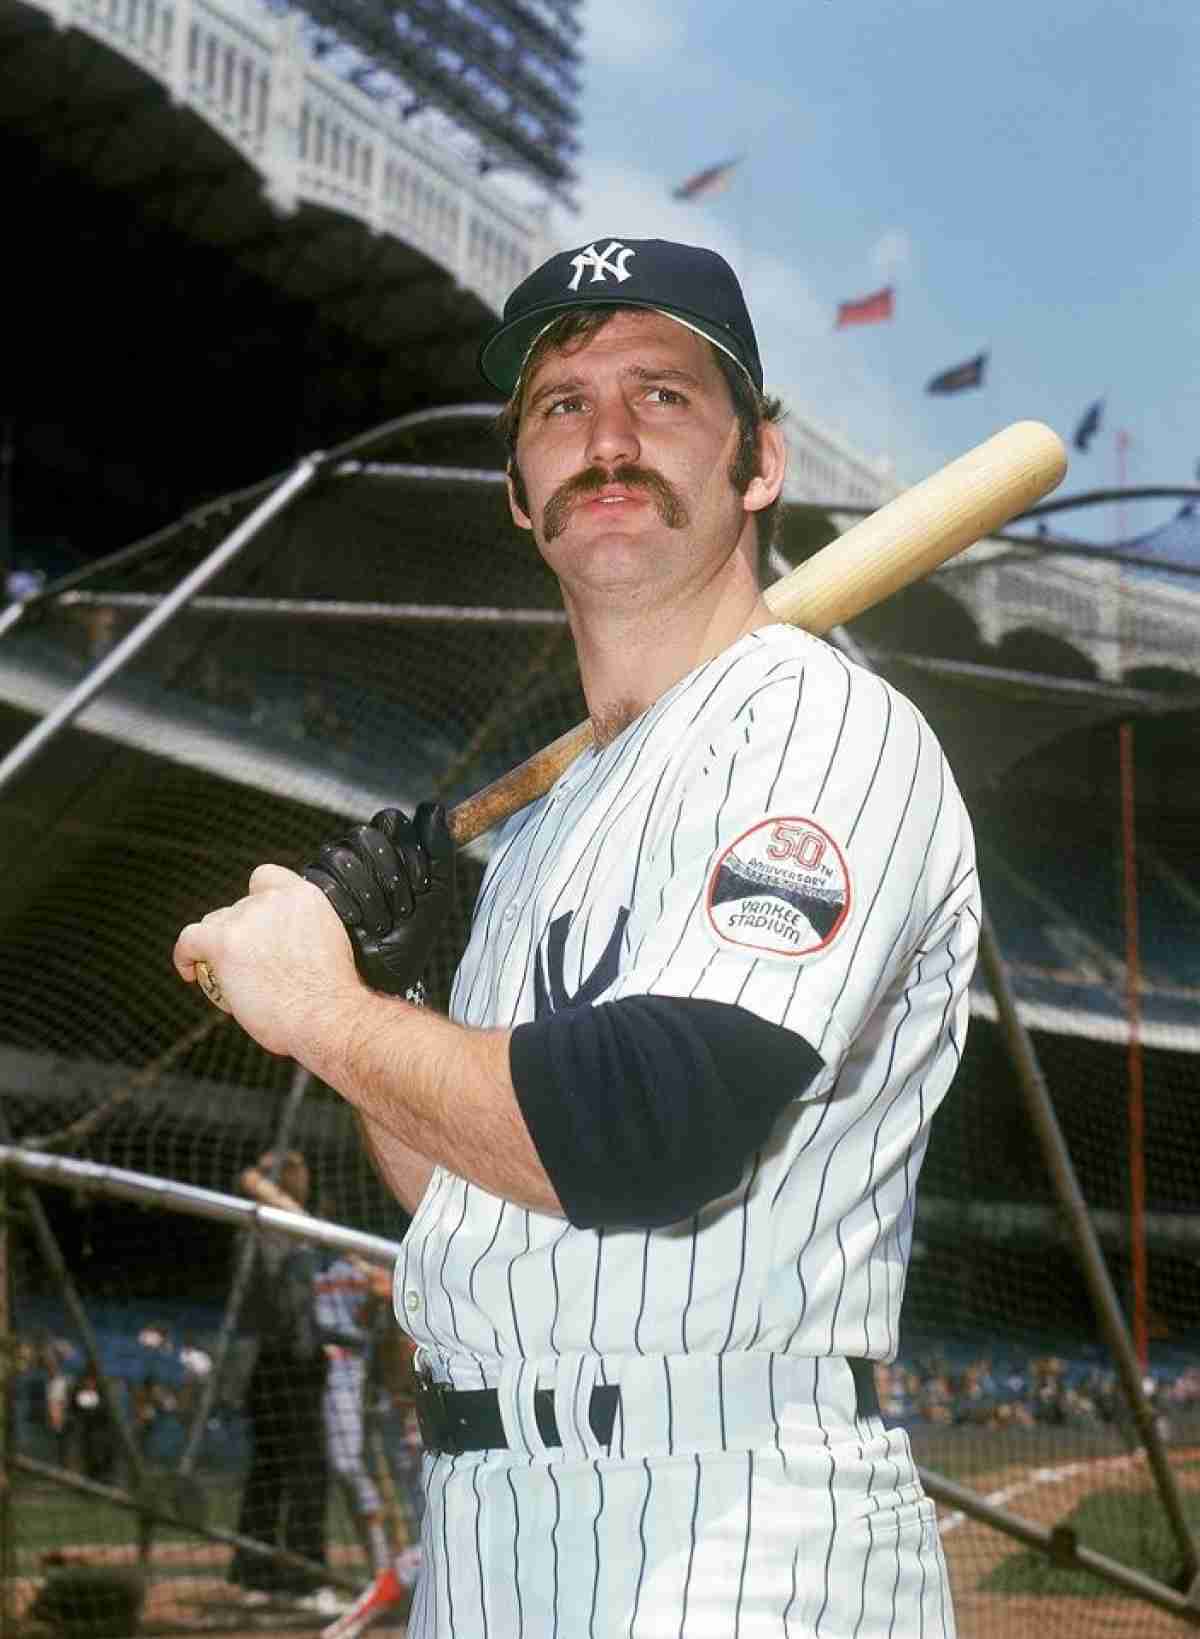 Not in Hall of Fame - 19. Thurman Munson